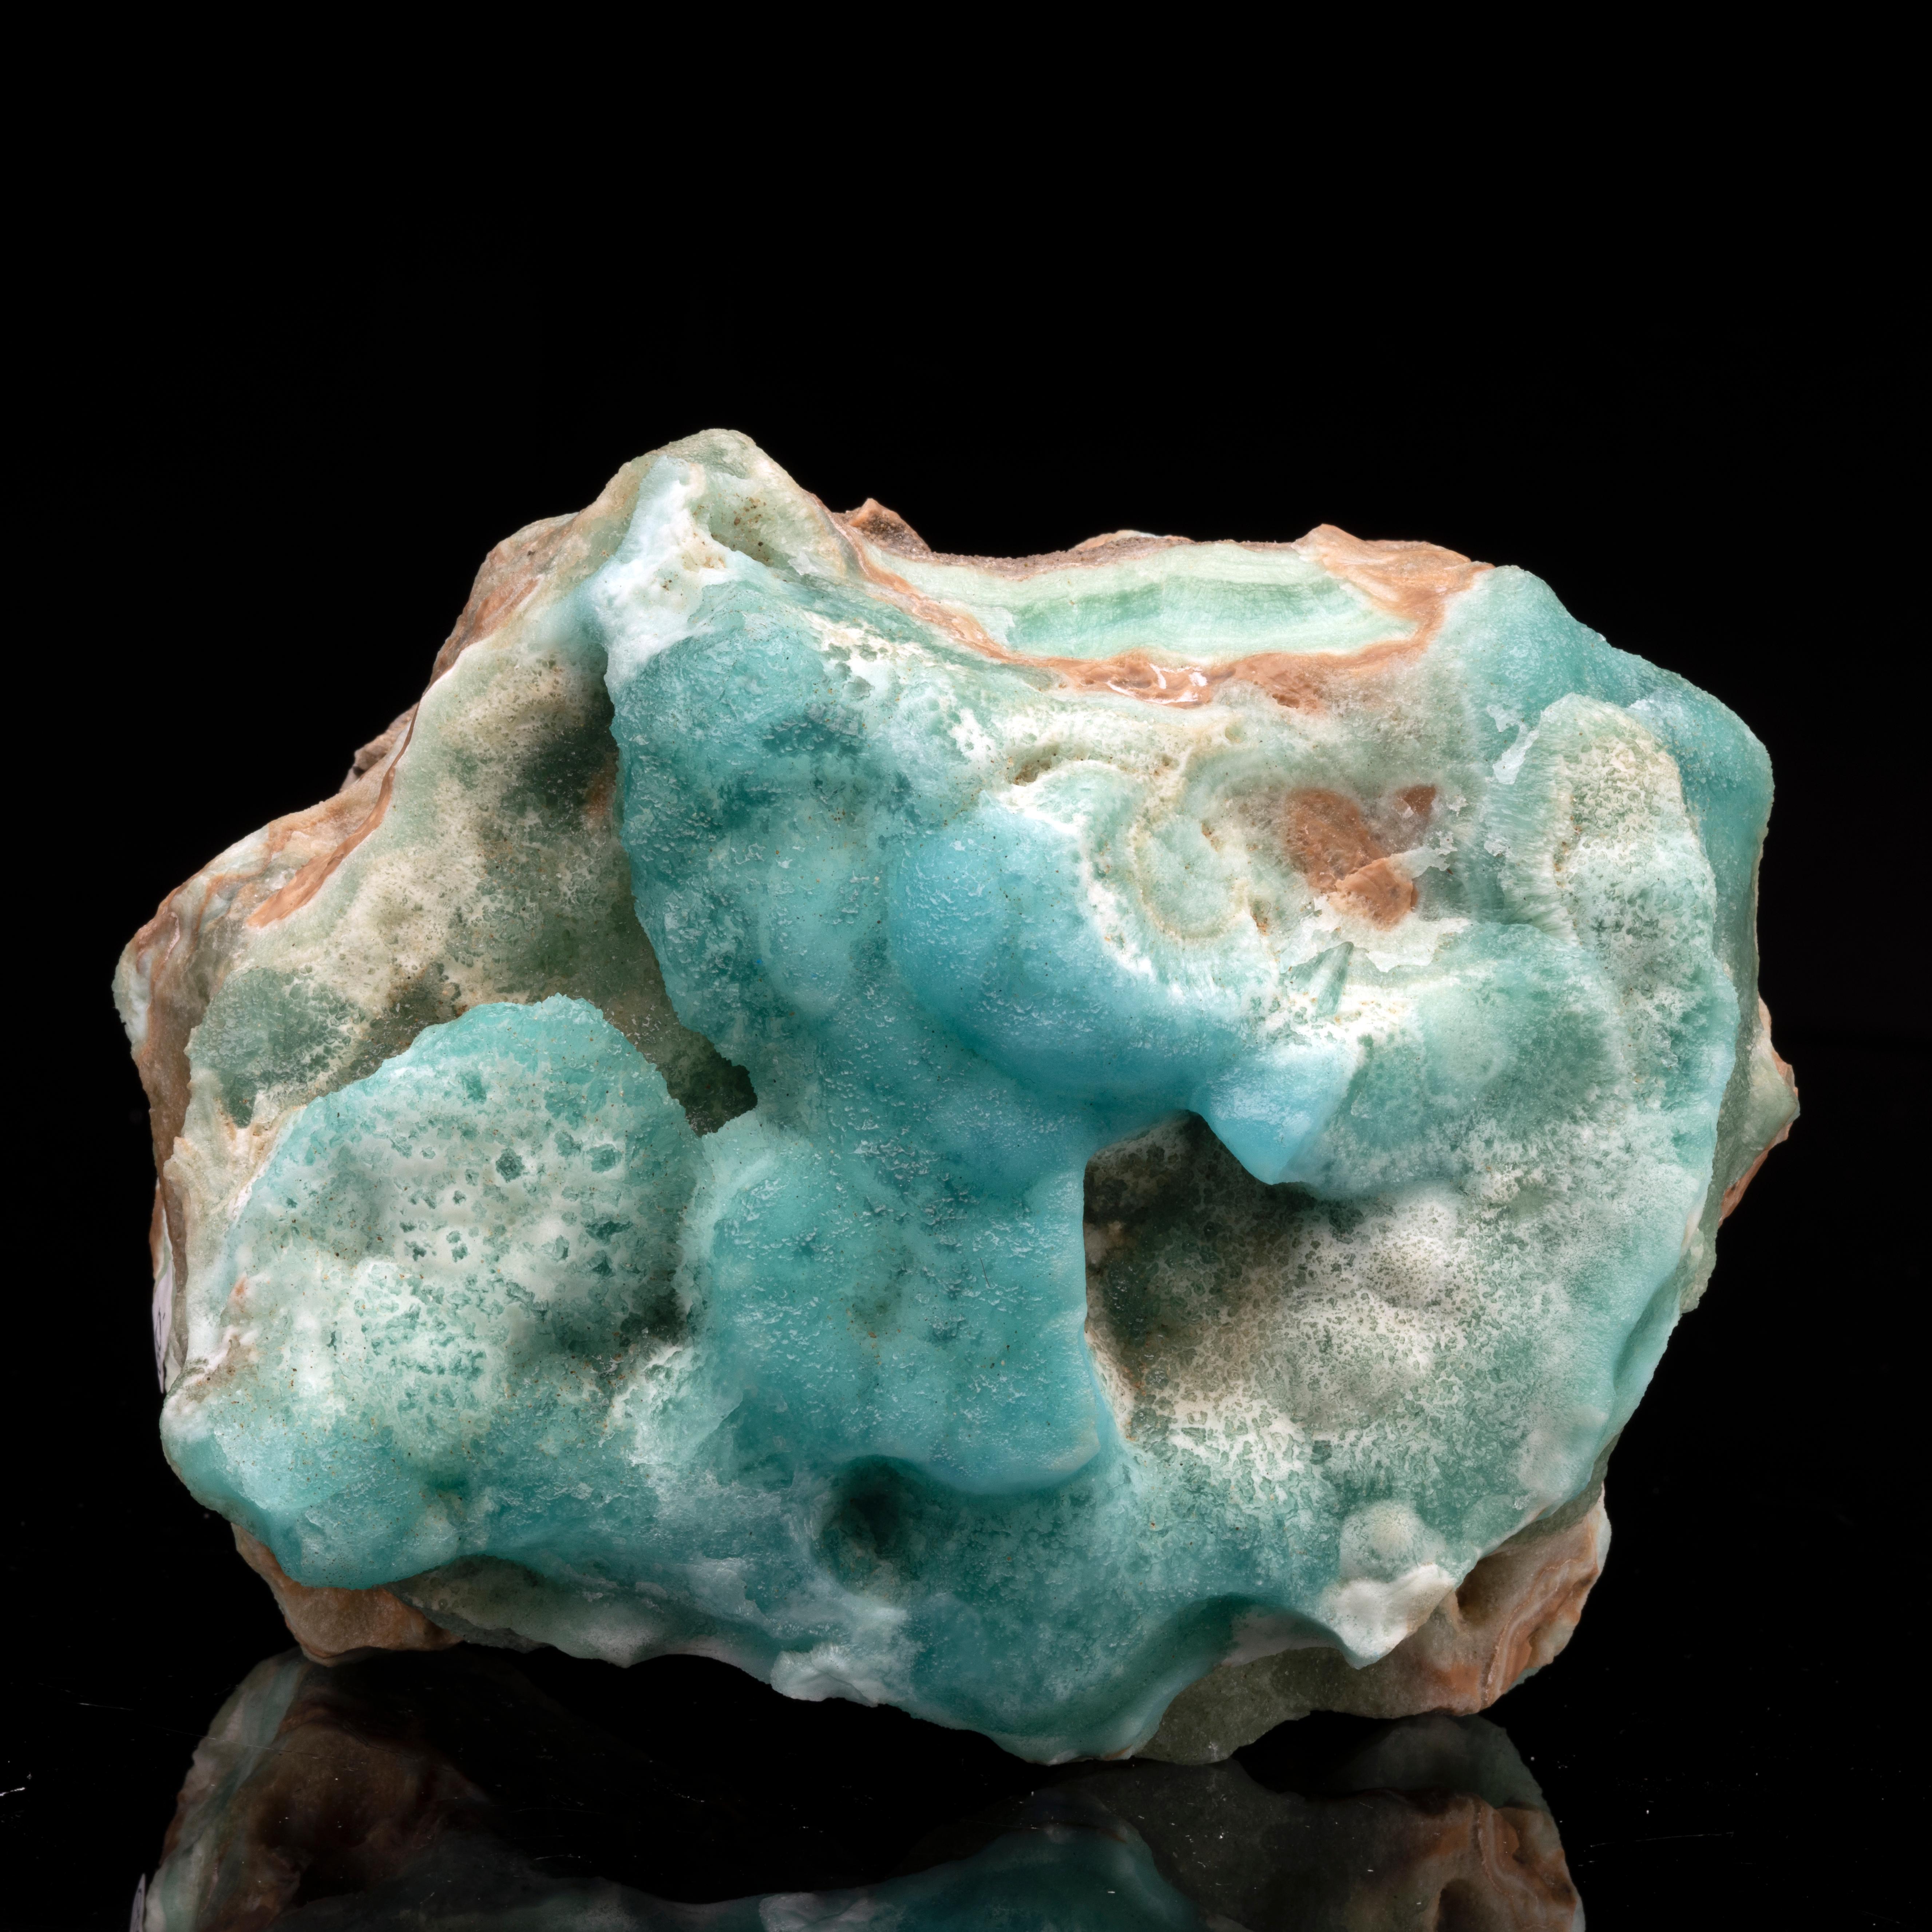 This rocky teal, white, and sandy reddish-brown freeform find is perfect for the discerning mineral enthusiast. The crystallized blue form of the calcium carbonate mineral is very sought-after and it's unusual to find pieces with such great luster